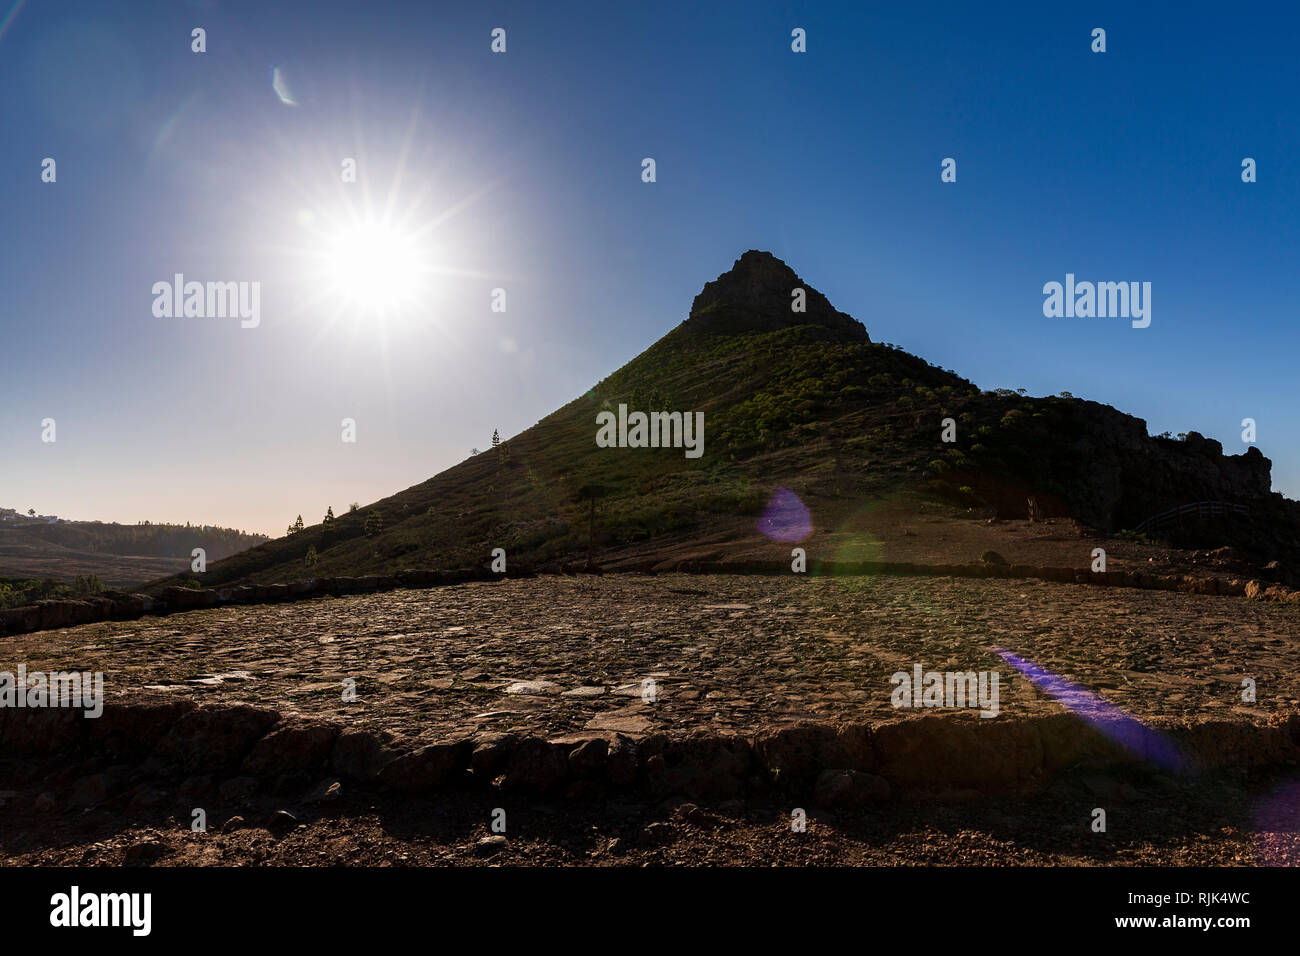 Sun flare created by shooting into the sun with the pointed Roque Imoque and a threshing floor, era, in Ifonche, Arona, Tenerife, Canary Islands, Spai Stock Photo